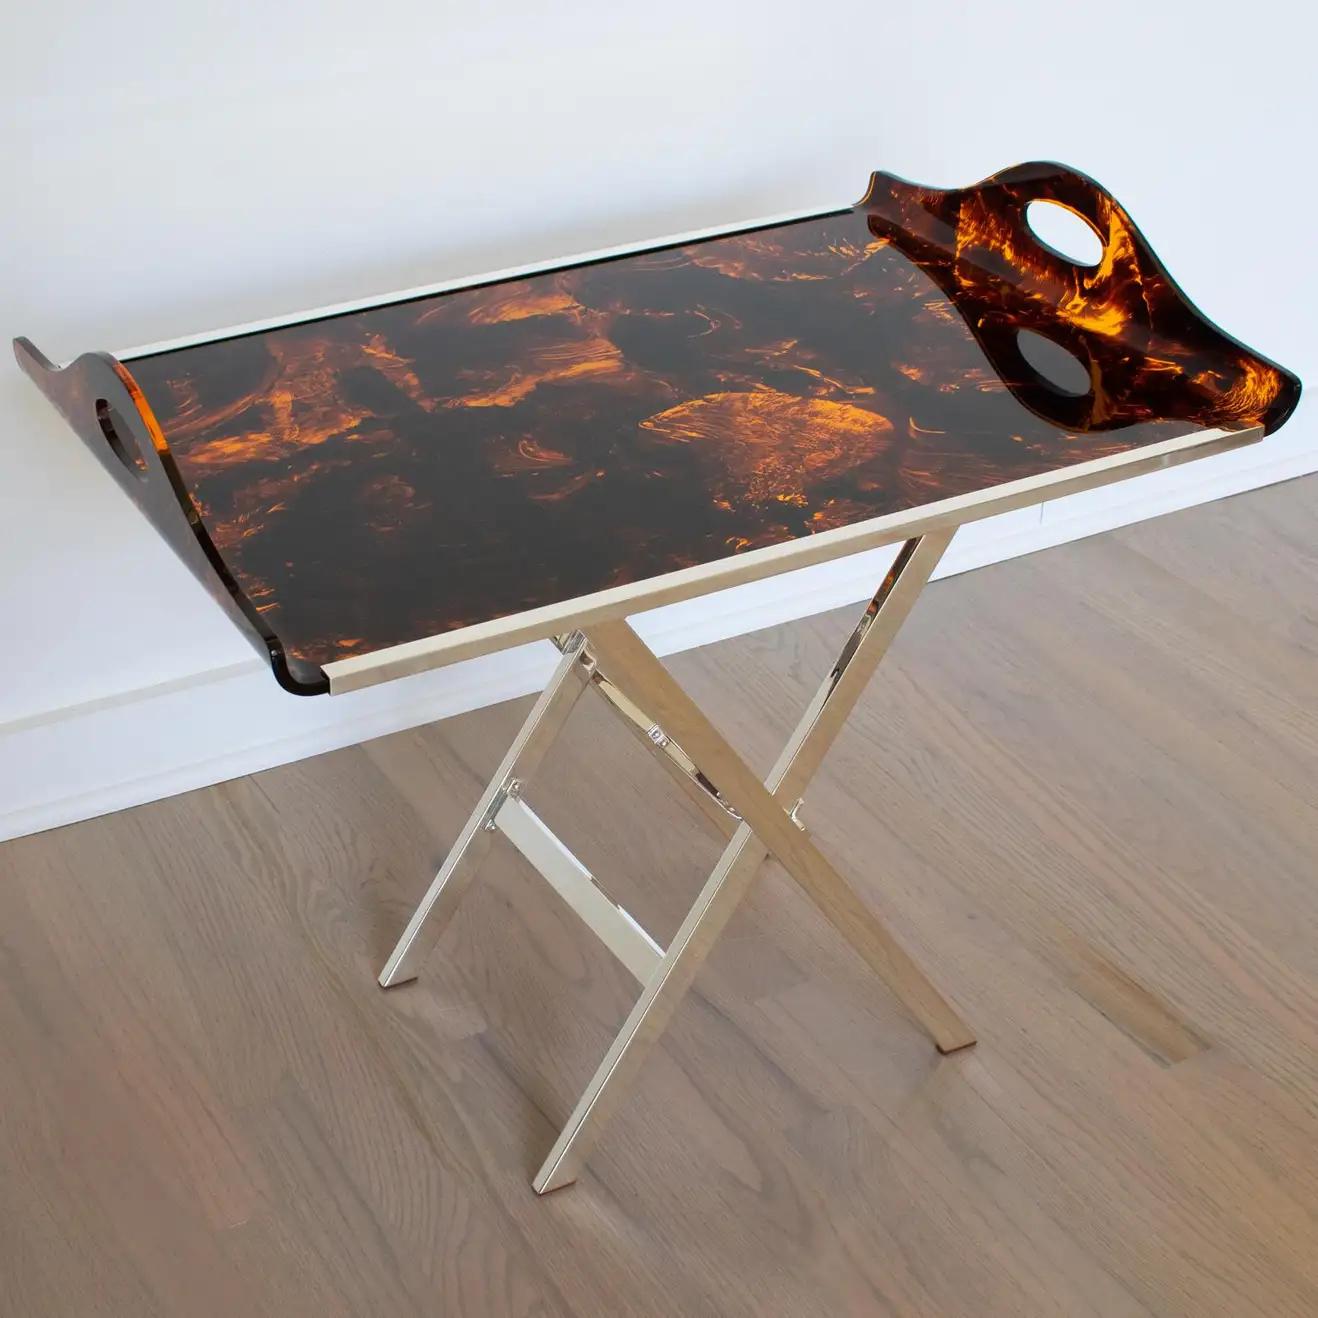 French Christian Dior Folding Tray Table Tortoiseshell Lucite and Silver Plate, 1960s For Sale